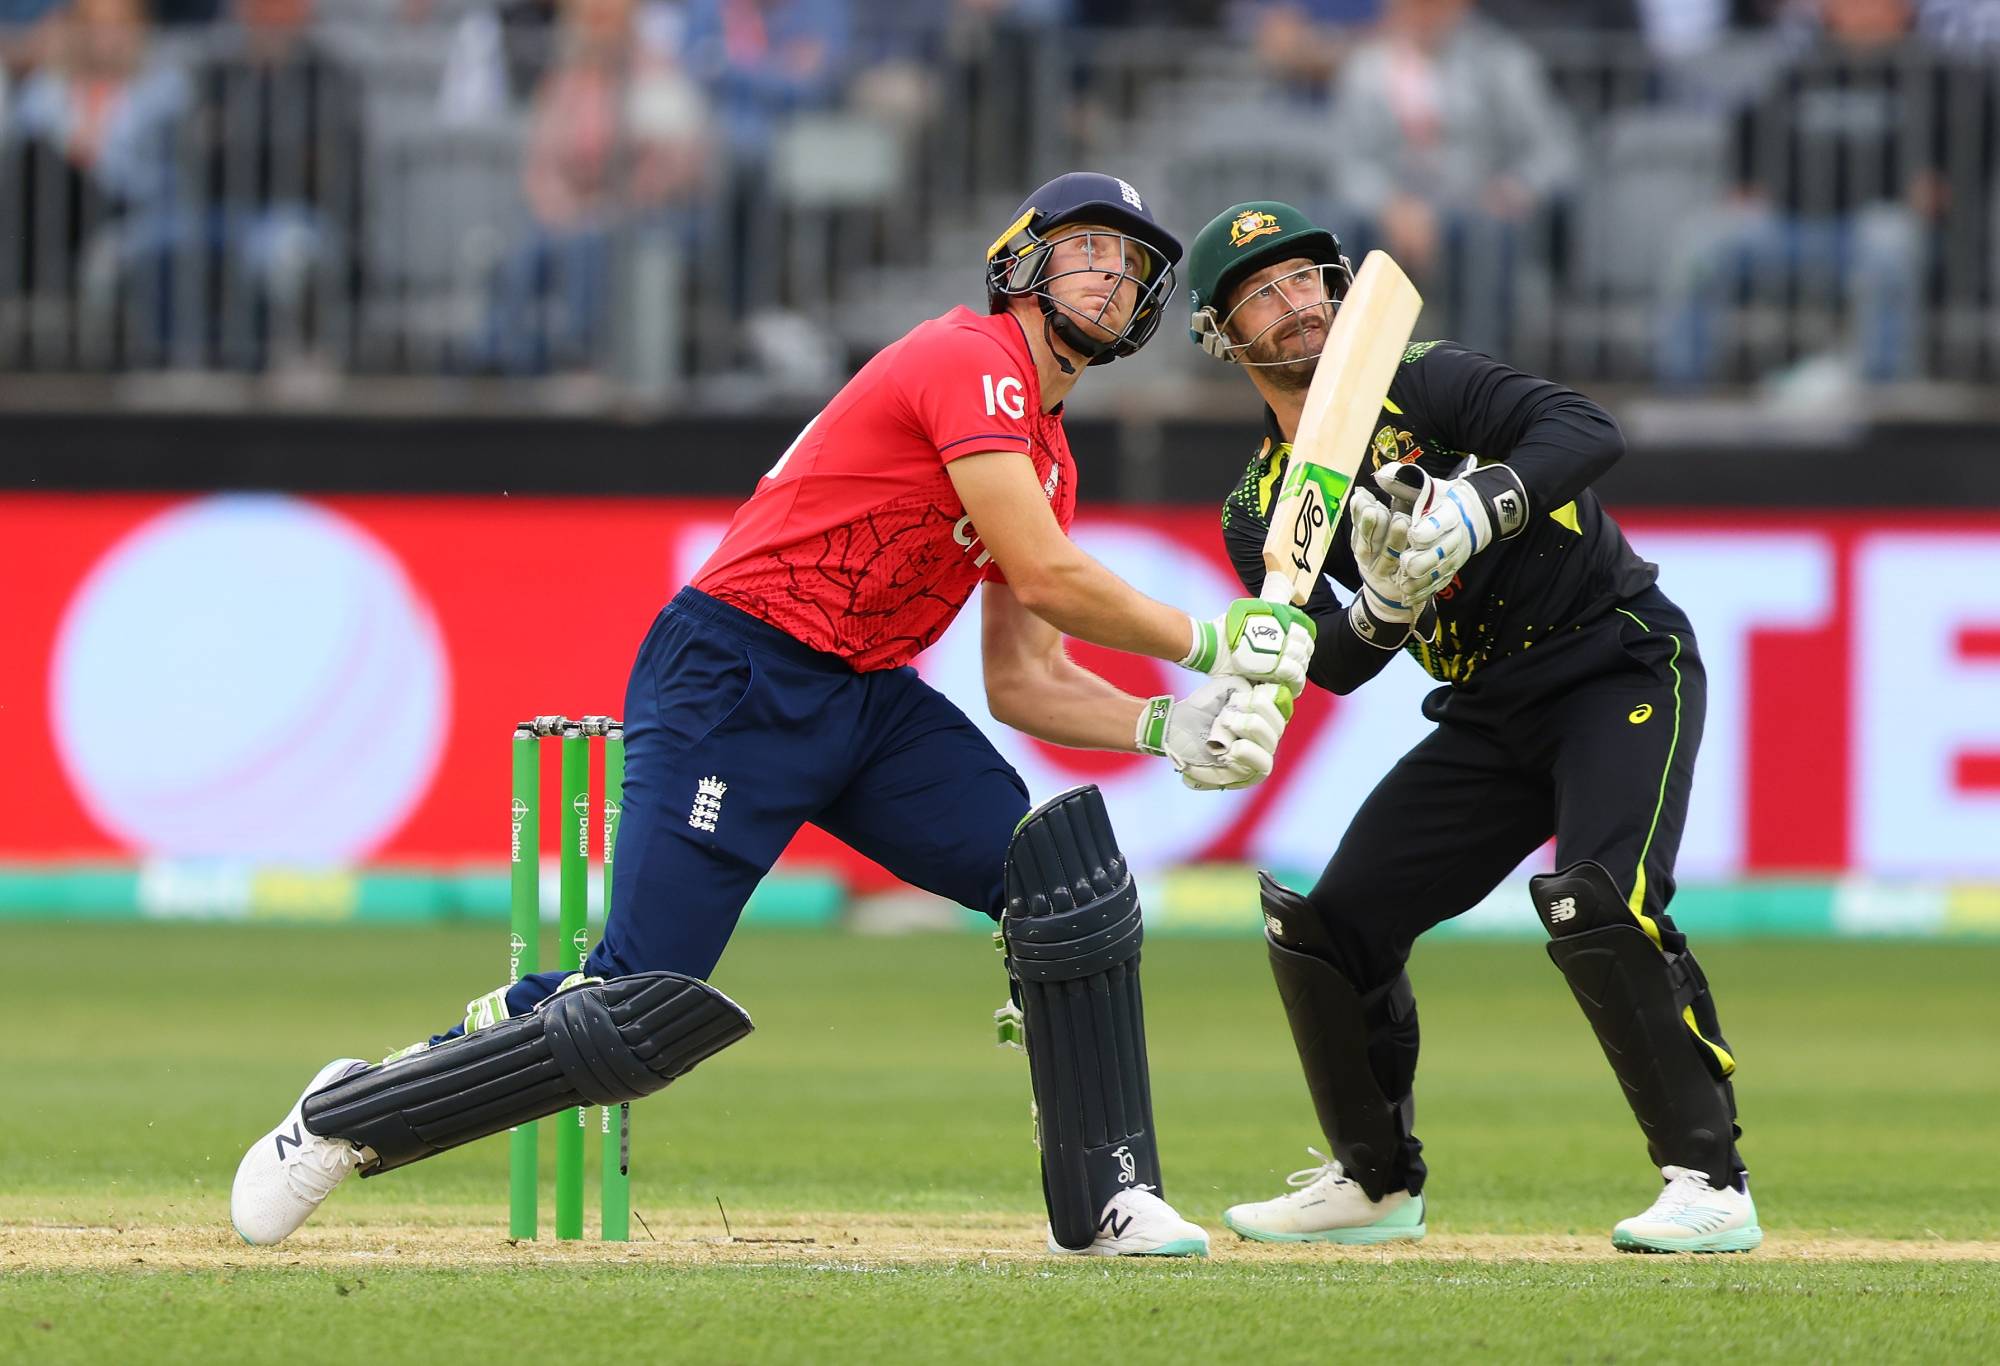 PERTH, AUSTRALIA - OCTOBER 09: Jos Buttler of England and Matthew Wade of Australia watch the ball go for six during game one of the T20 International series between Australia and England at Optus Stadium on October 09, 2022 in Perth, Australia. (Photo by James Worsfold/Getty Images)